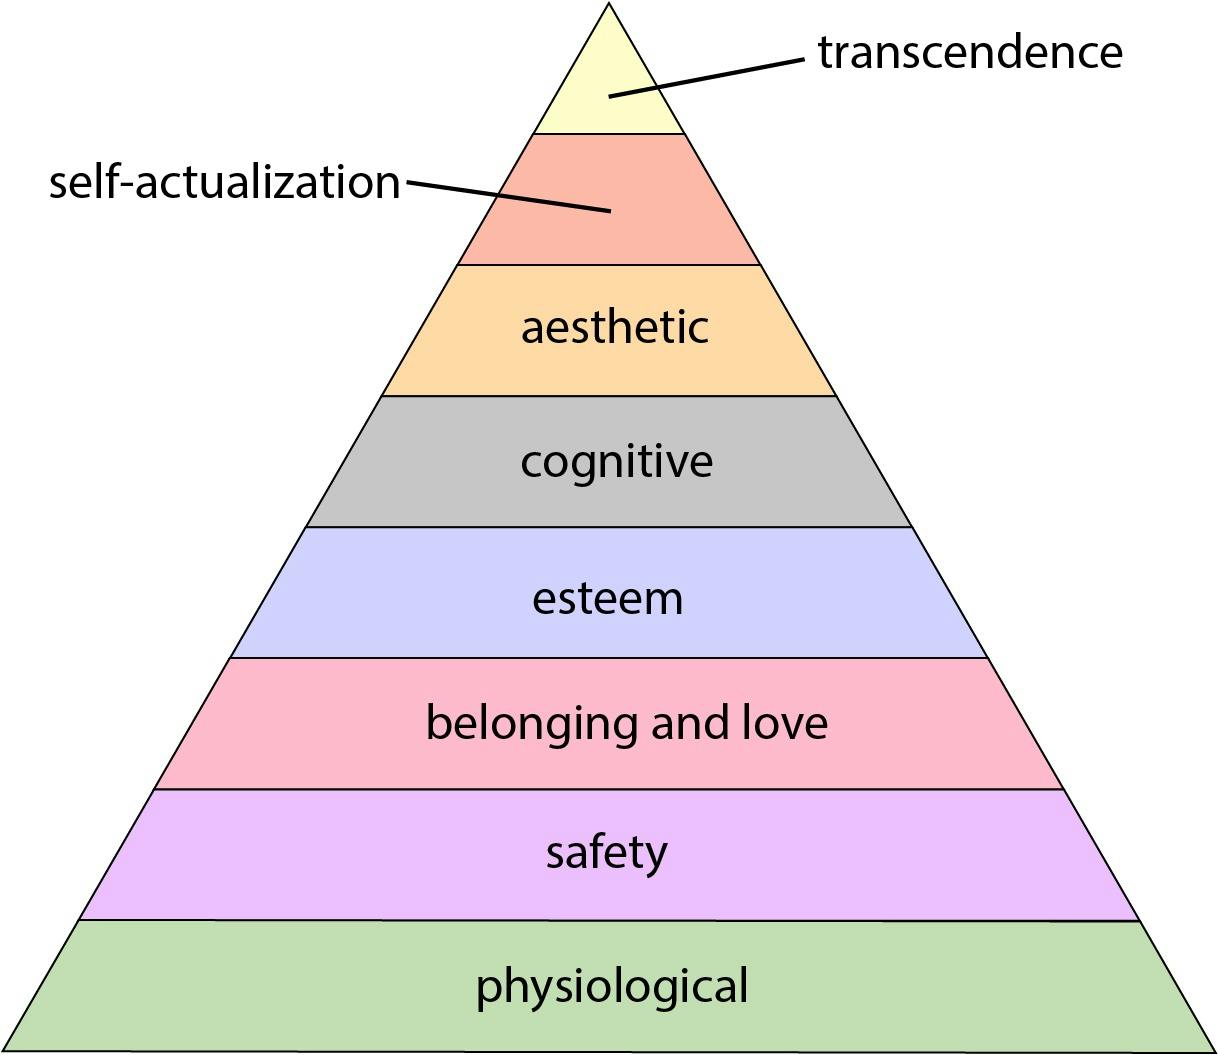 Source: [Wikipedia](https://en.wikipedia.org/wiki/Maslow%27s_hierarchy_of_needs#/media/File:MaslowHierarchy.png)